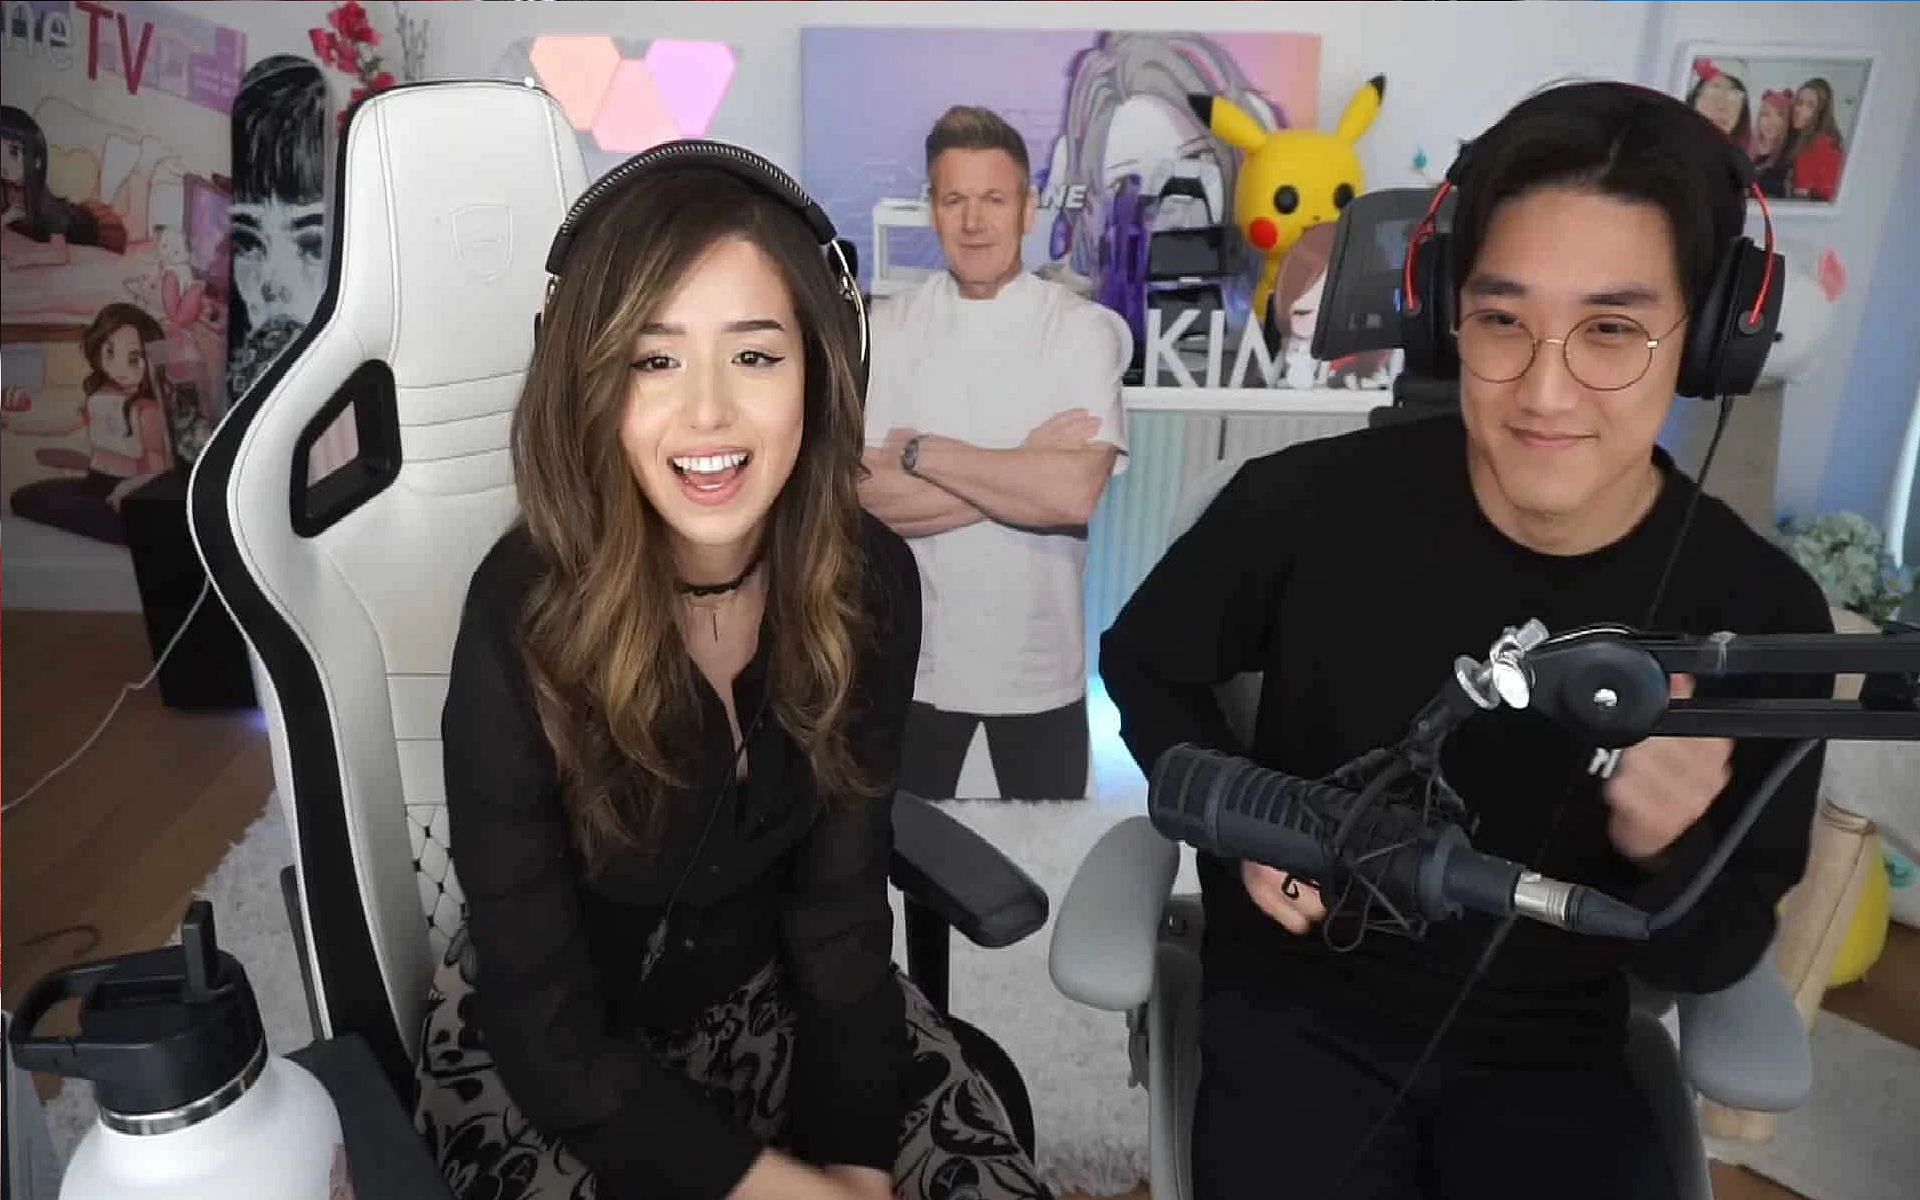 Kevin discovered Poki&#039;s ASMR mics, much to her embarrassment (Image via Sportskeeda)